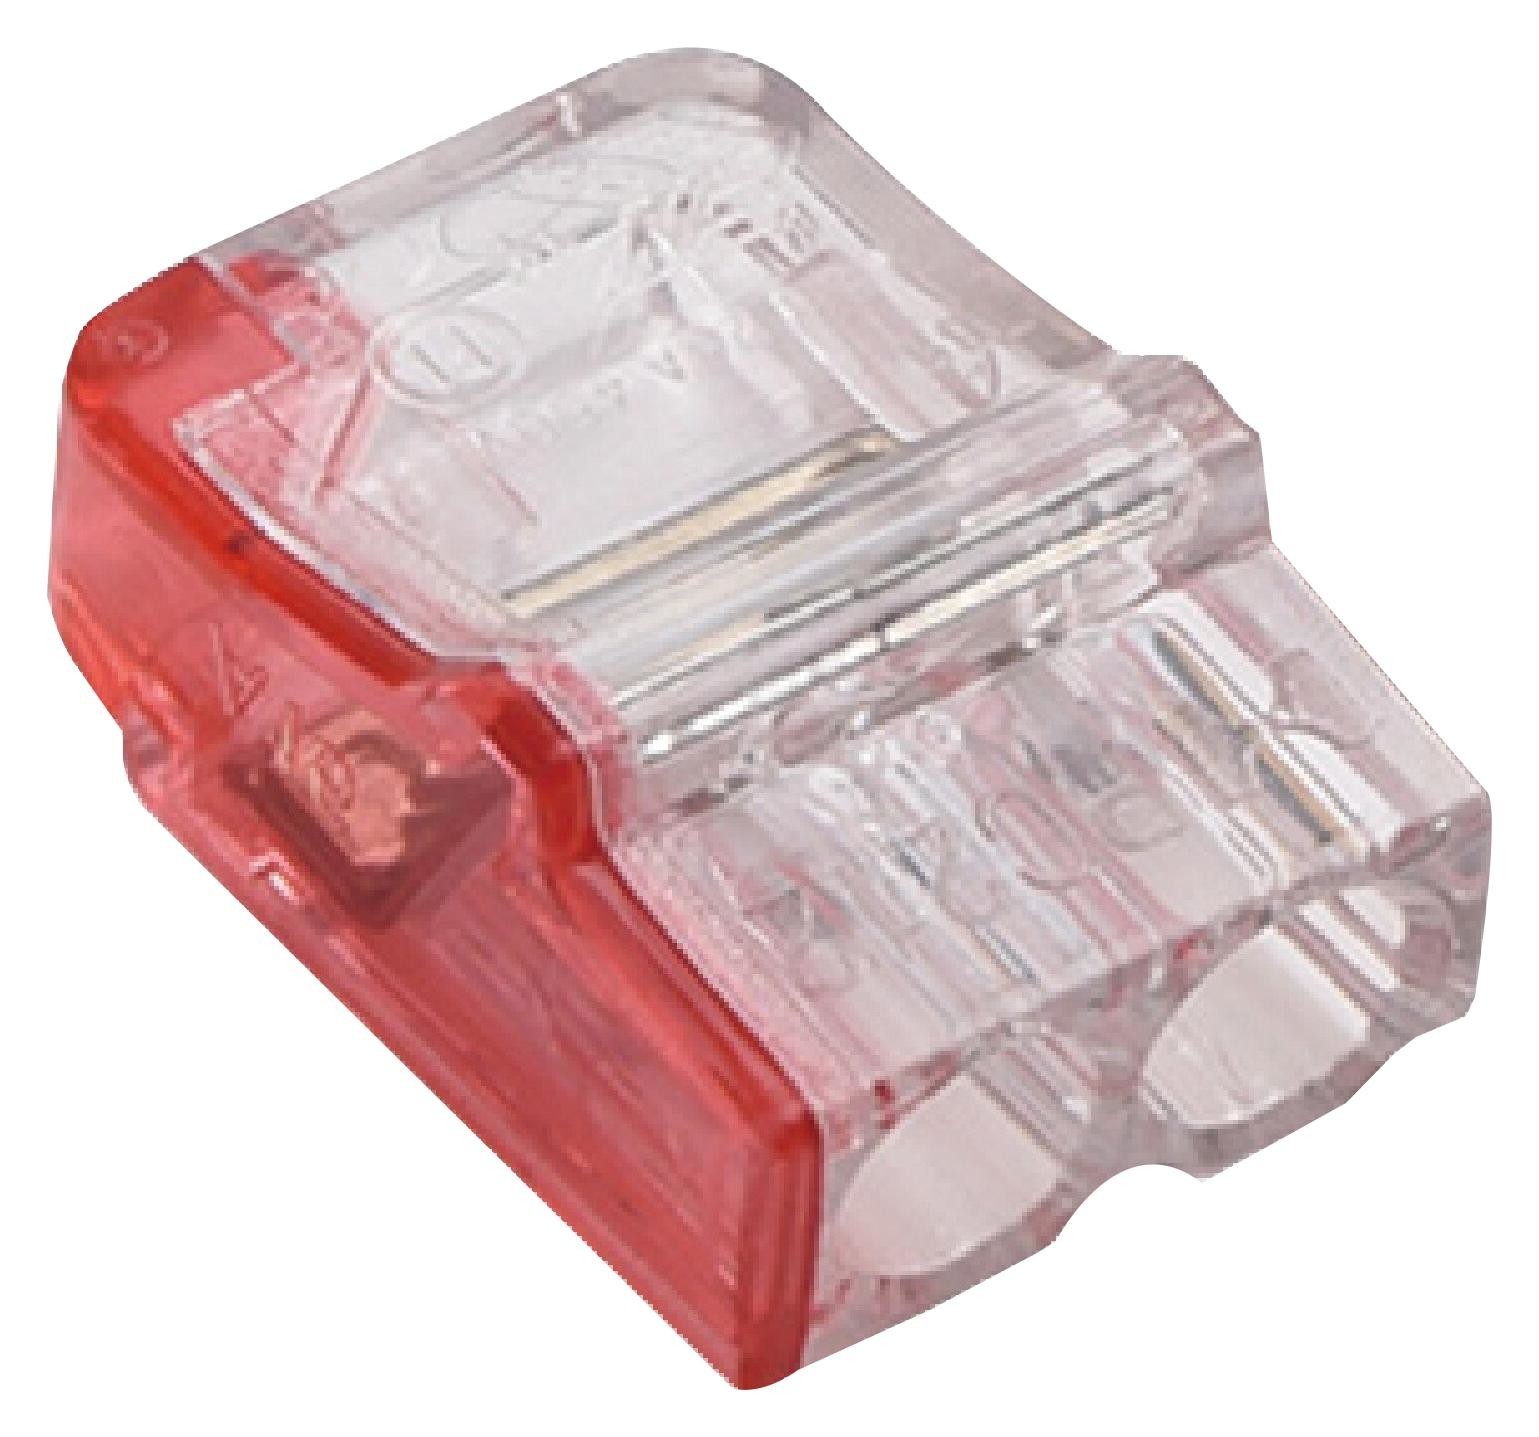 Entrelec TE Connectivity 1Set211001R0000 Terminal, Wire Splice, 22-12 Awg, Red